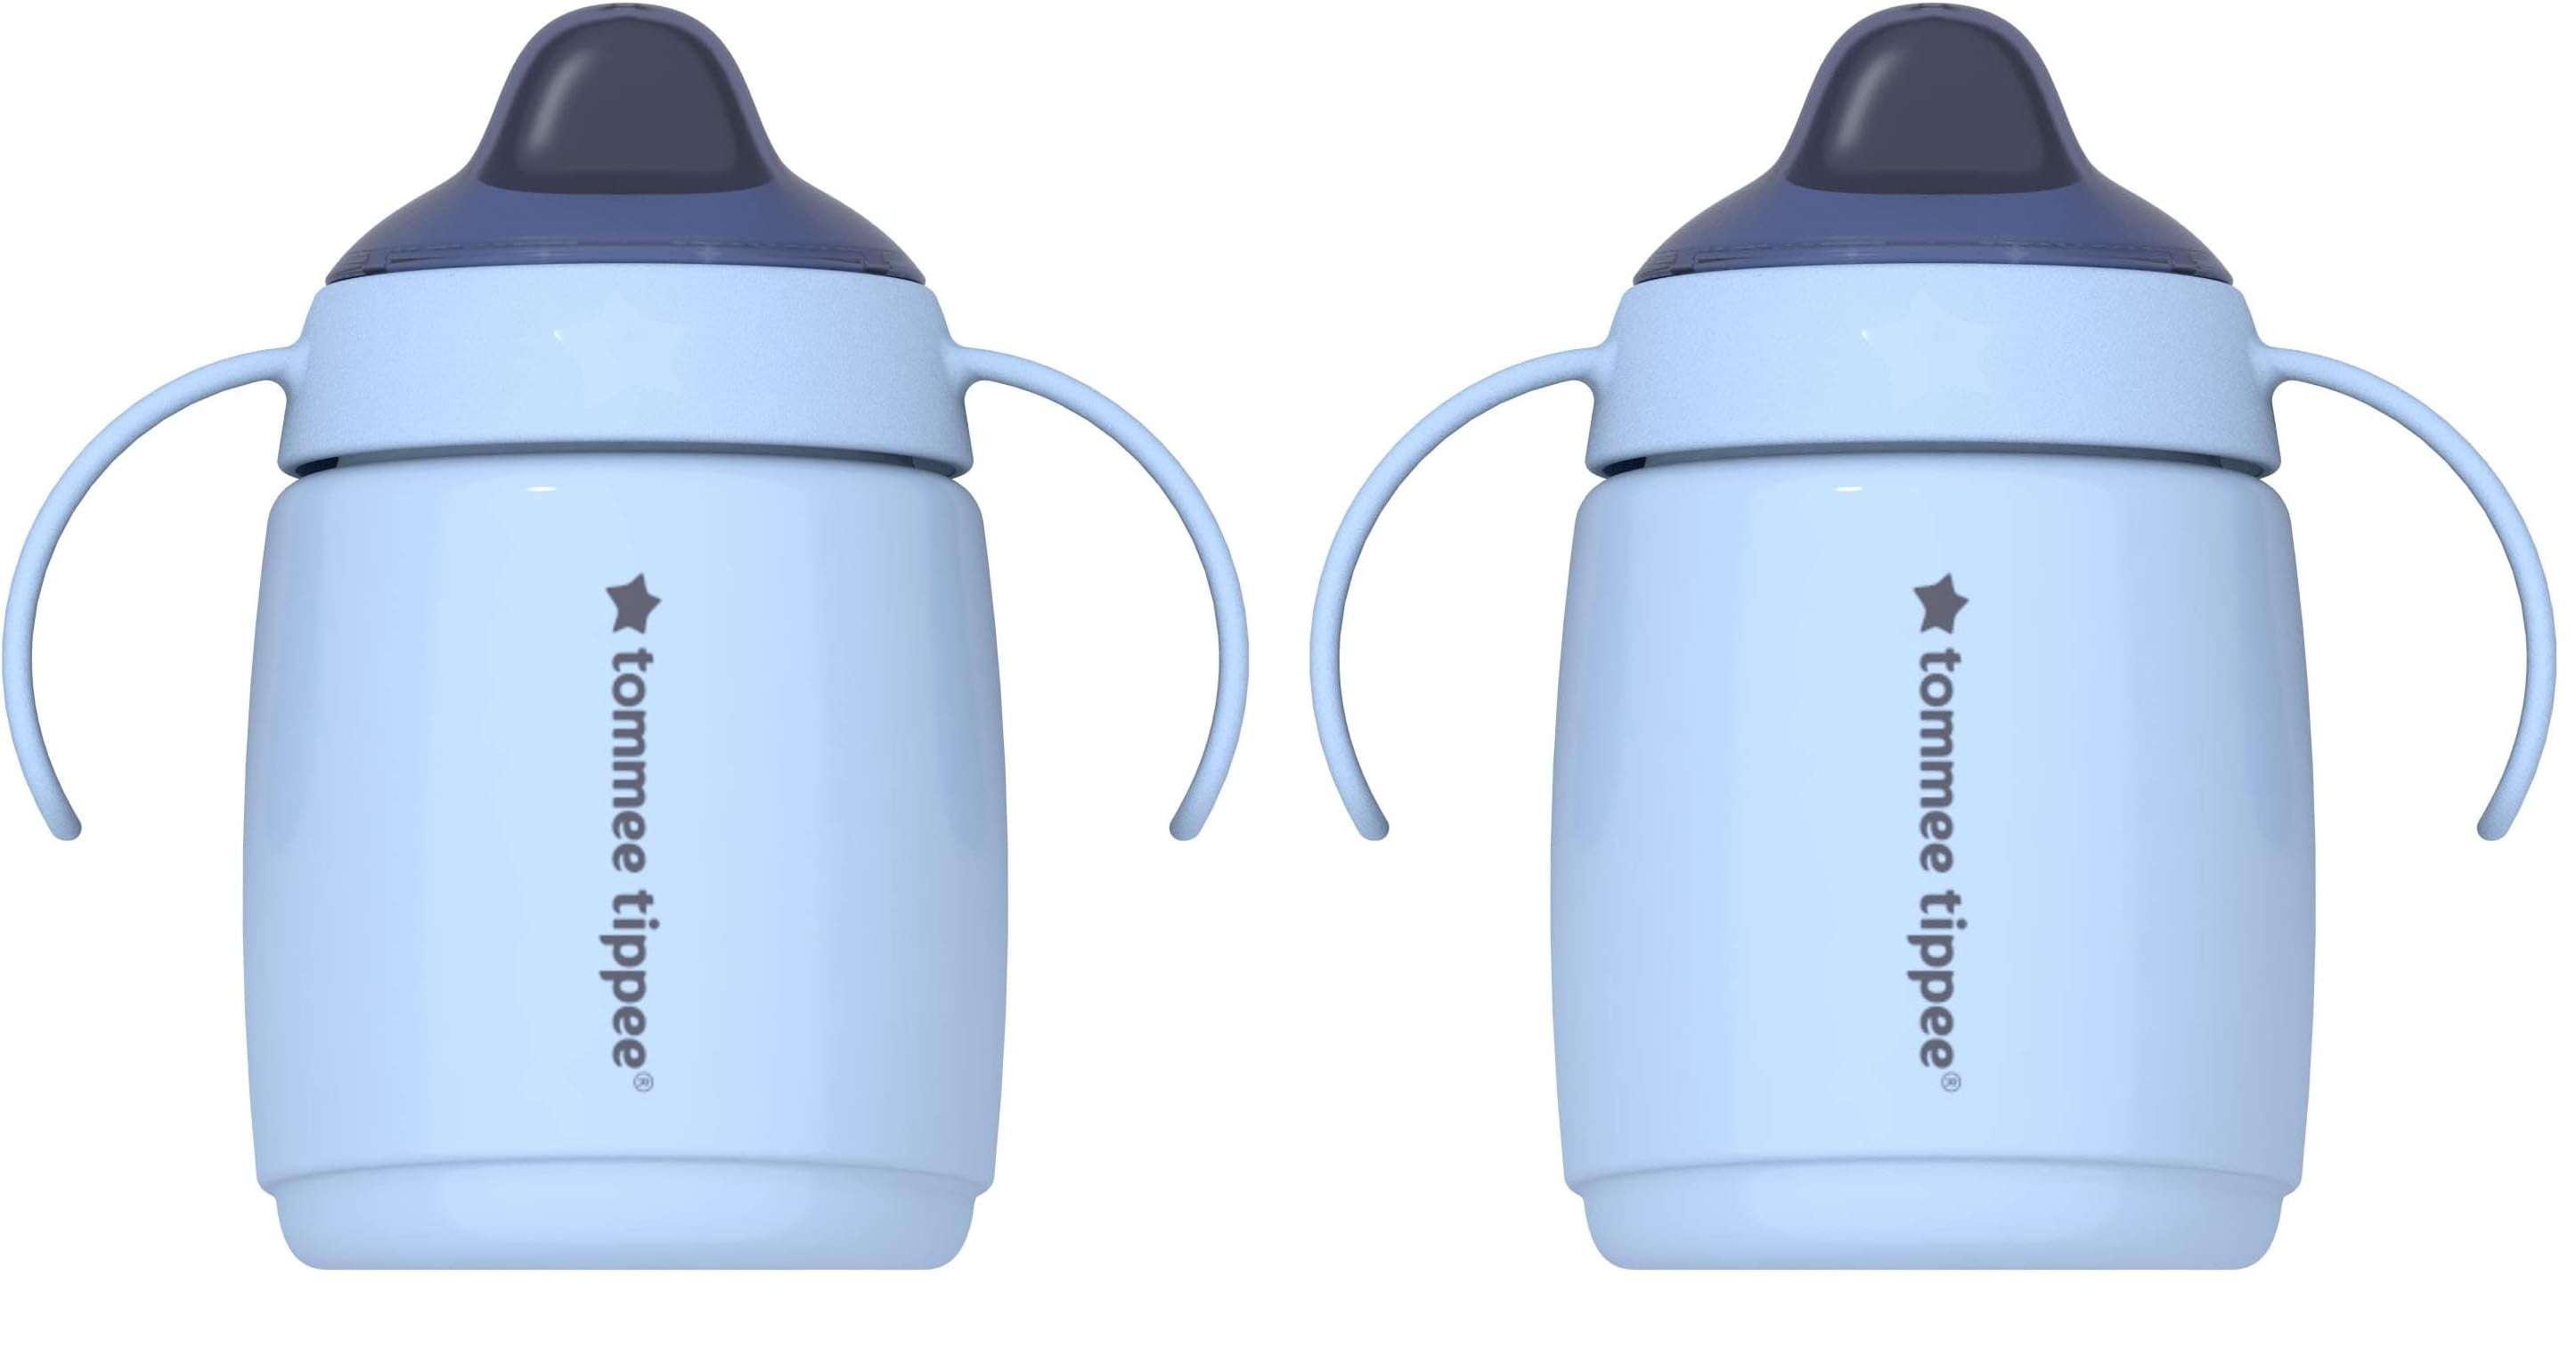 Tommee Tippee Toddler Sippee Cup, Girl 9+ Months, 3pk, Size: 10oz